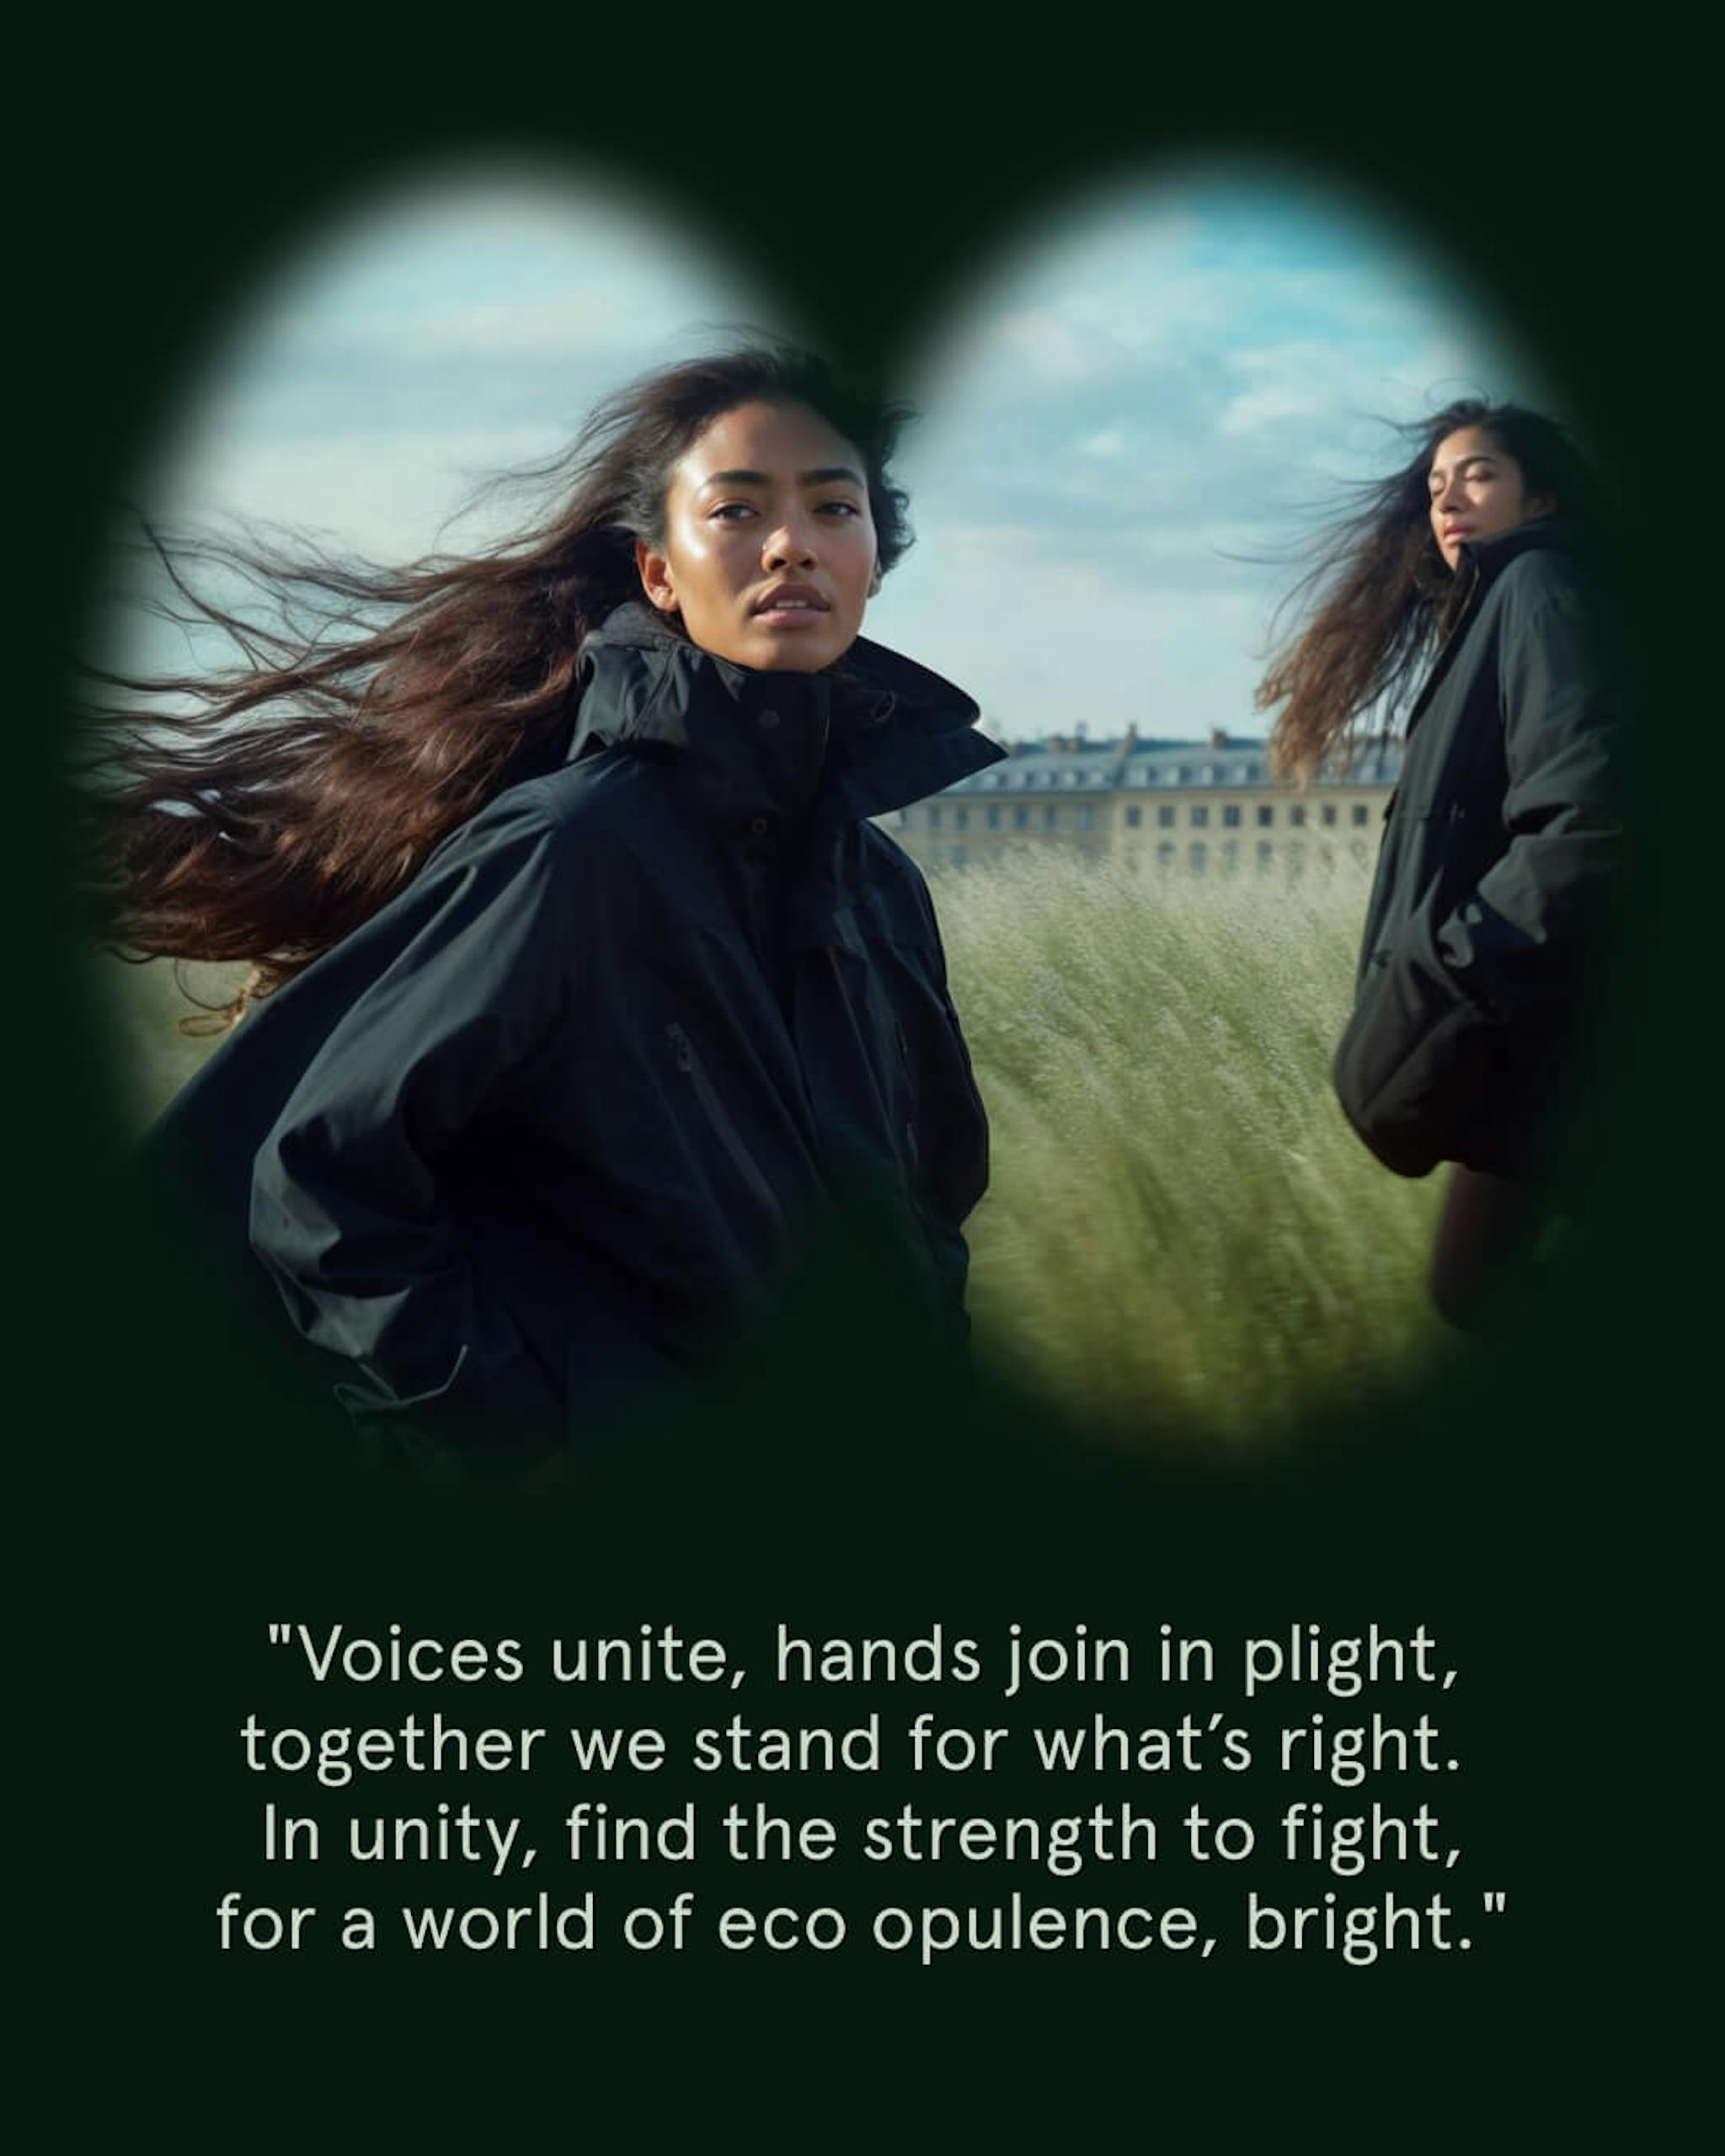 Two people with long, wind-swept hair, standing against a city backdrop, viewed through a binocular vignette with a quote: "Voices unite, hands join in plight, together we stand for what’s right. In unity, find the strength to fight, for a world of eco opulence, bright."